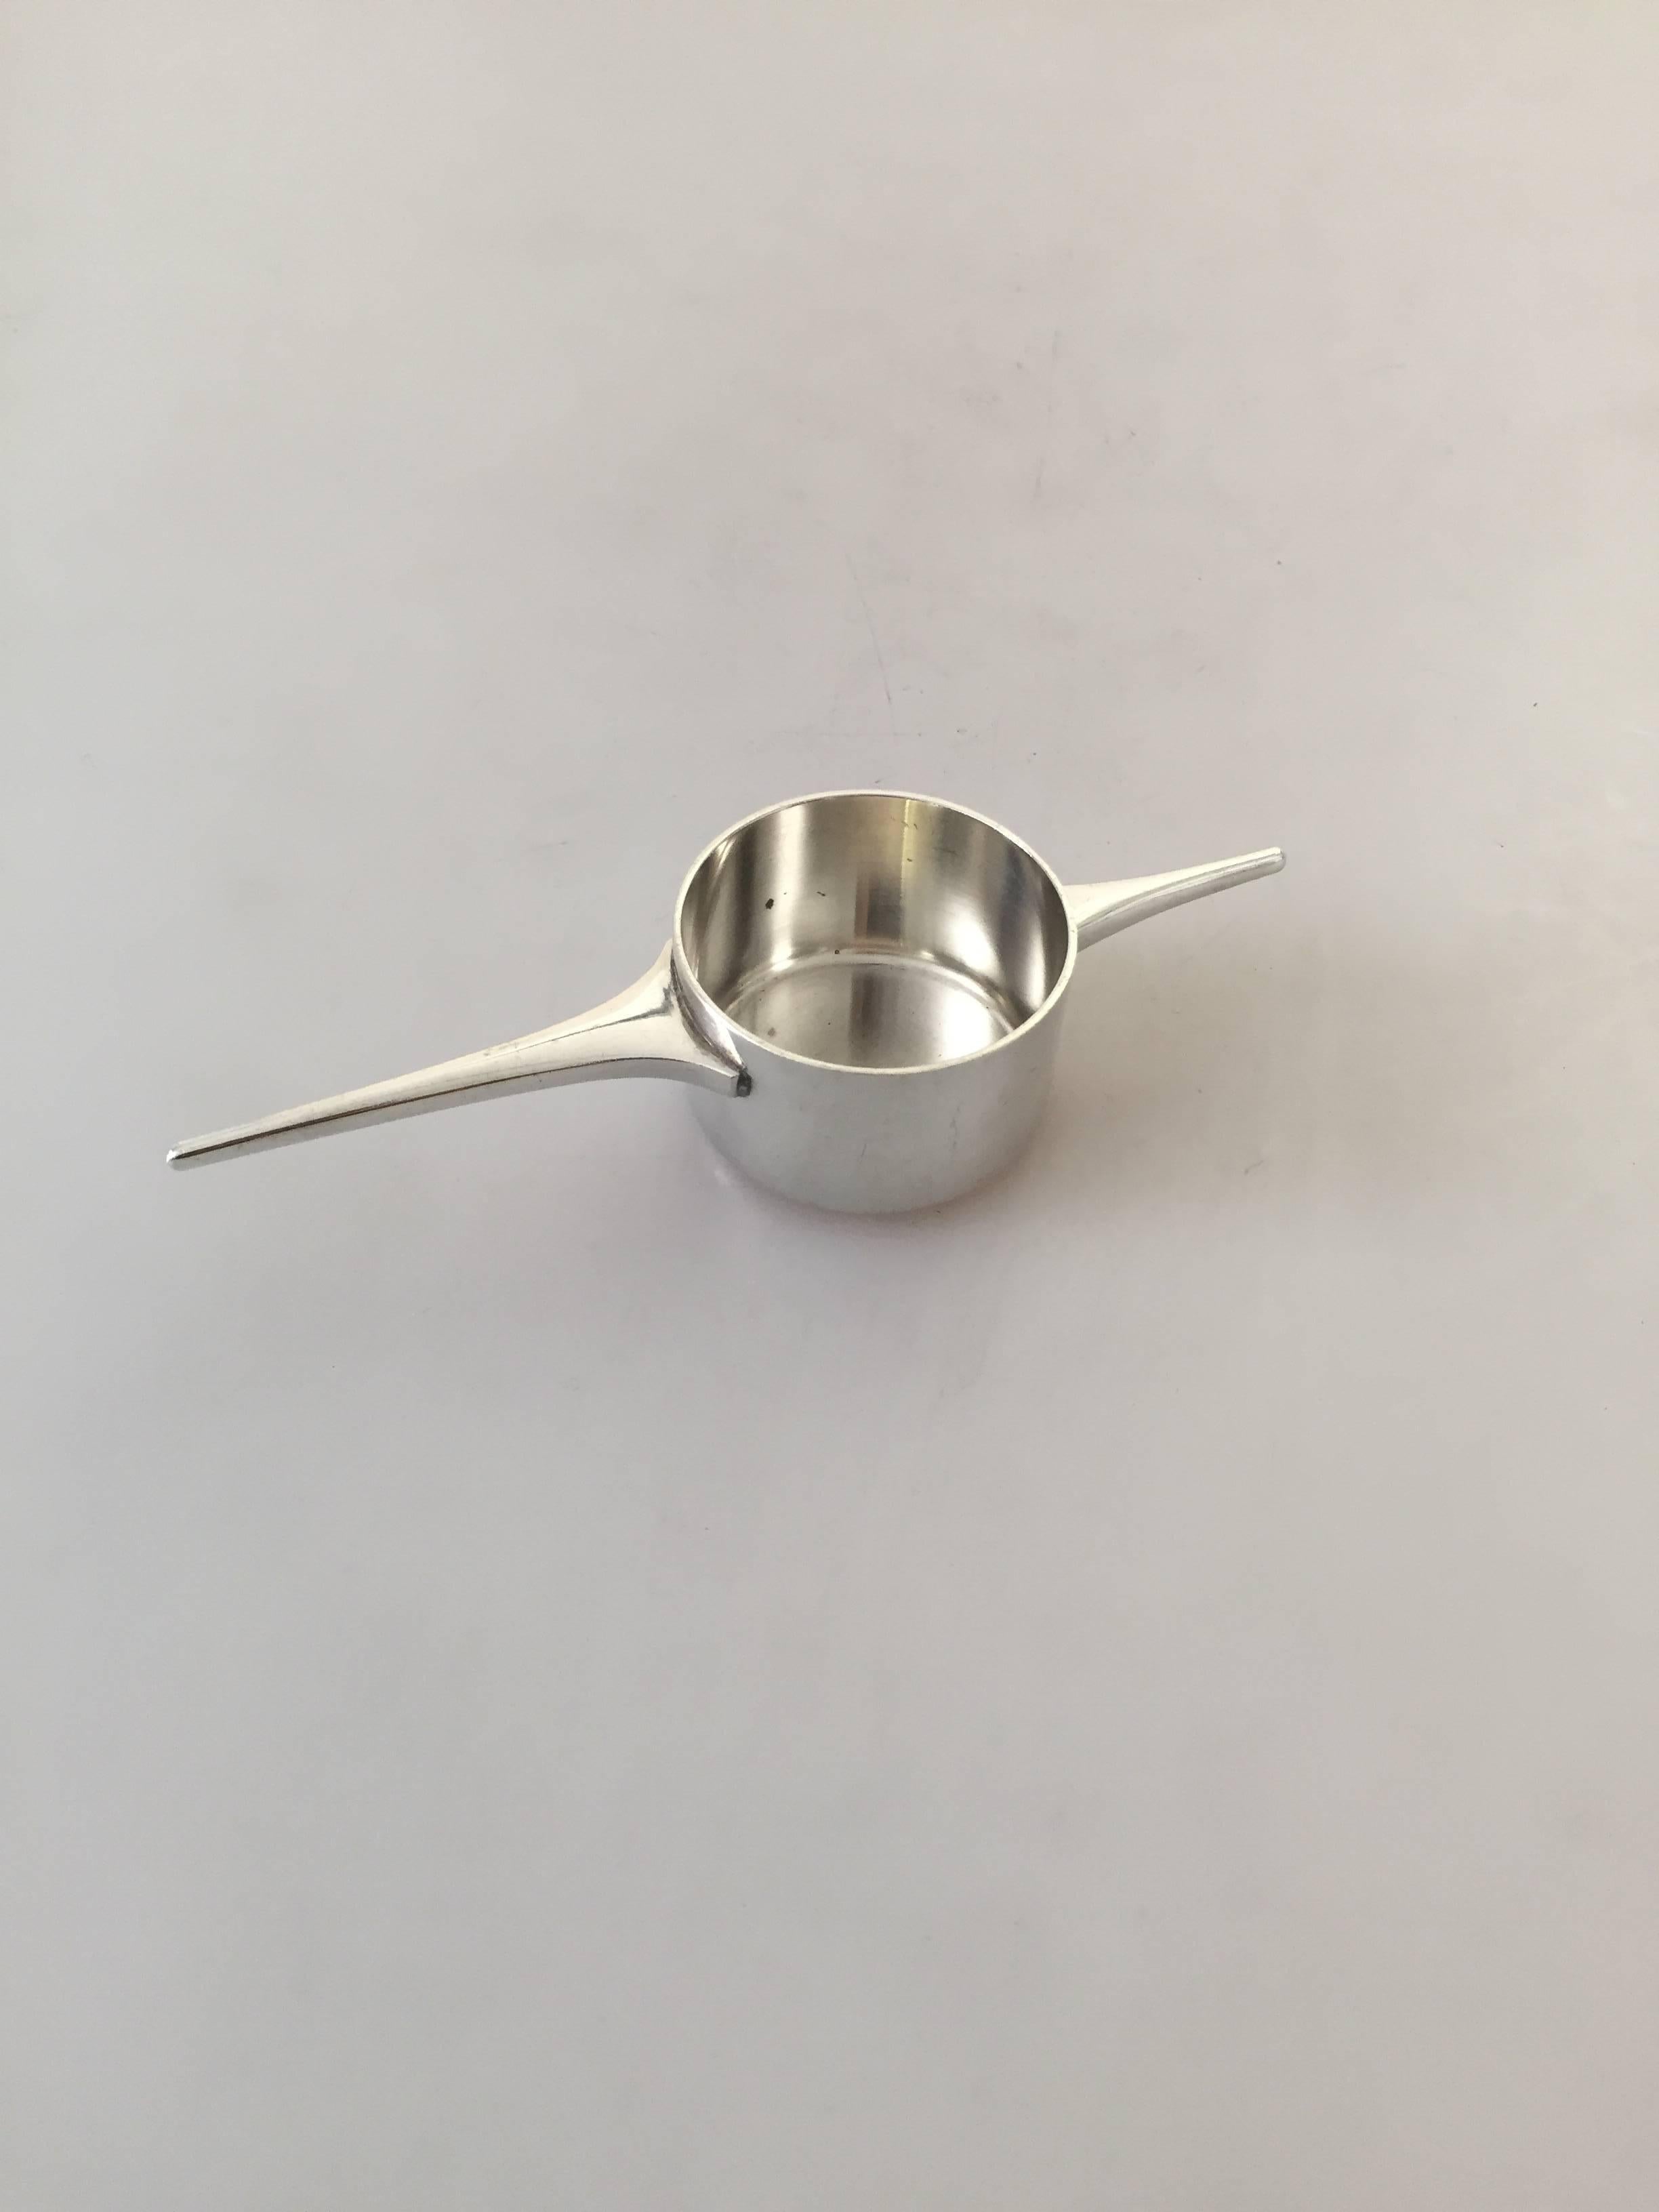 Anton Michelsen Sterling Silver Eigil Jensen Jigger. Contains 1 oz. In perfect condition..

Measurements: 4 cm in diameter, 2.5 cm high, 12.5 cm in total length.  